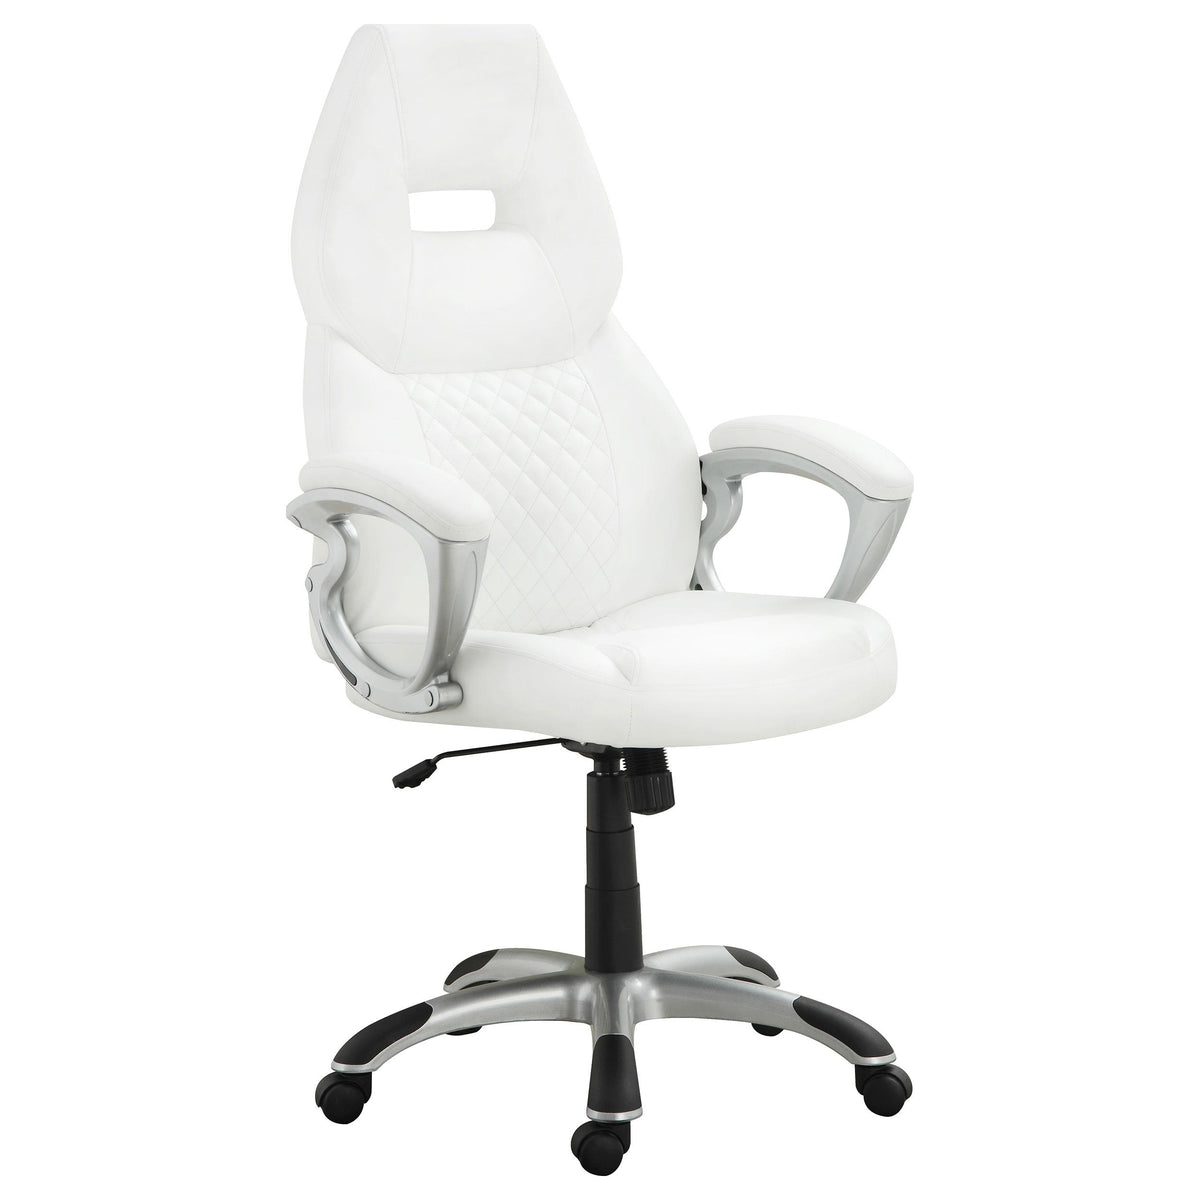 Bruce Adjustable Height Office Chair White and Silver Bruce Adjustable Height Office Chair White and Silver Half Price Furniture